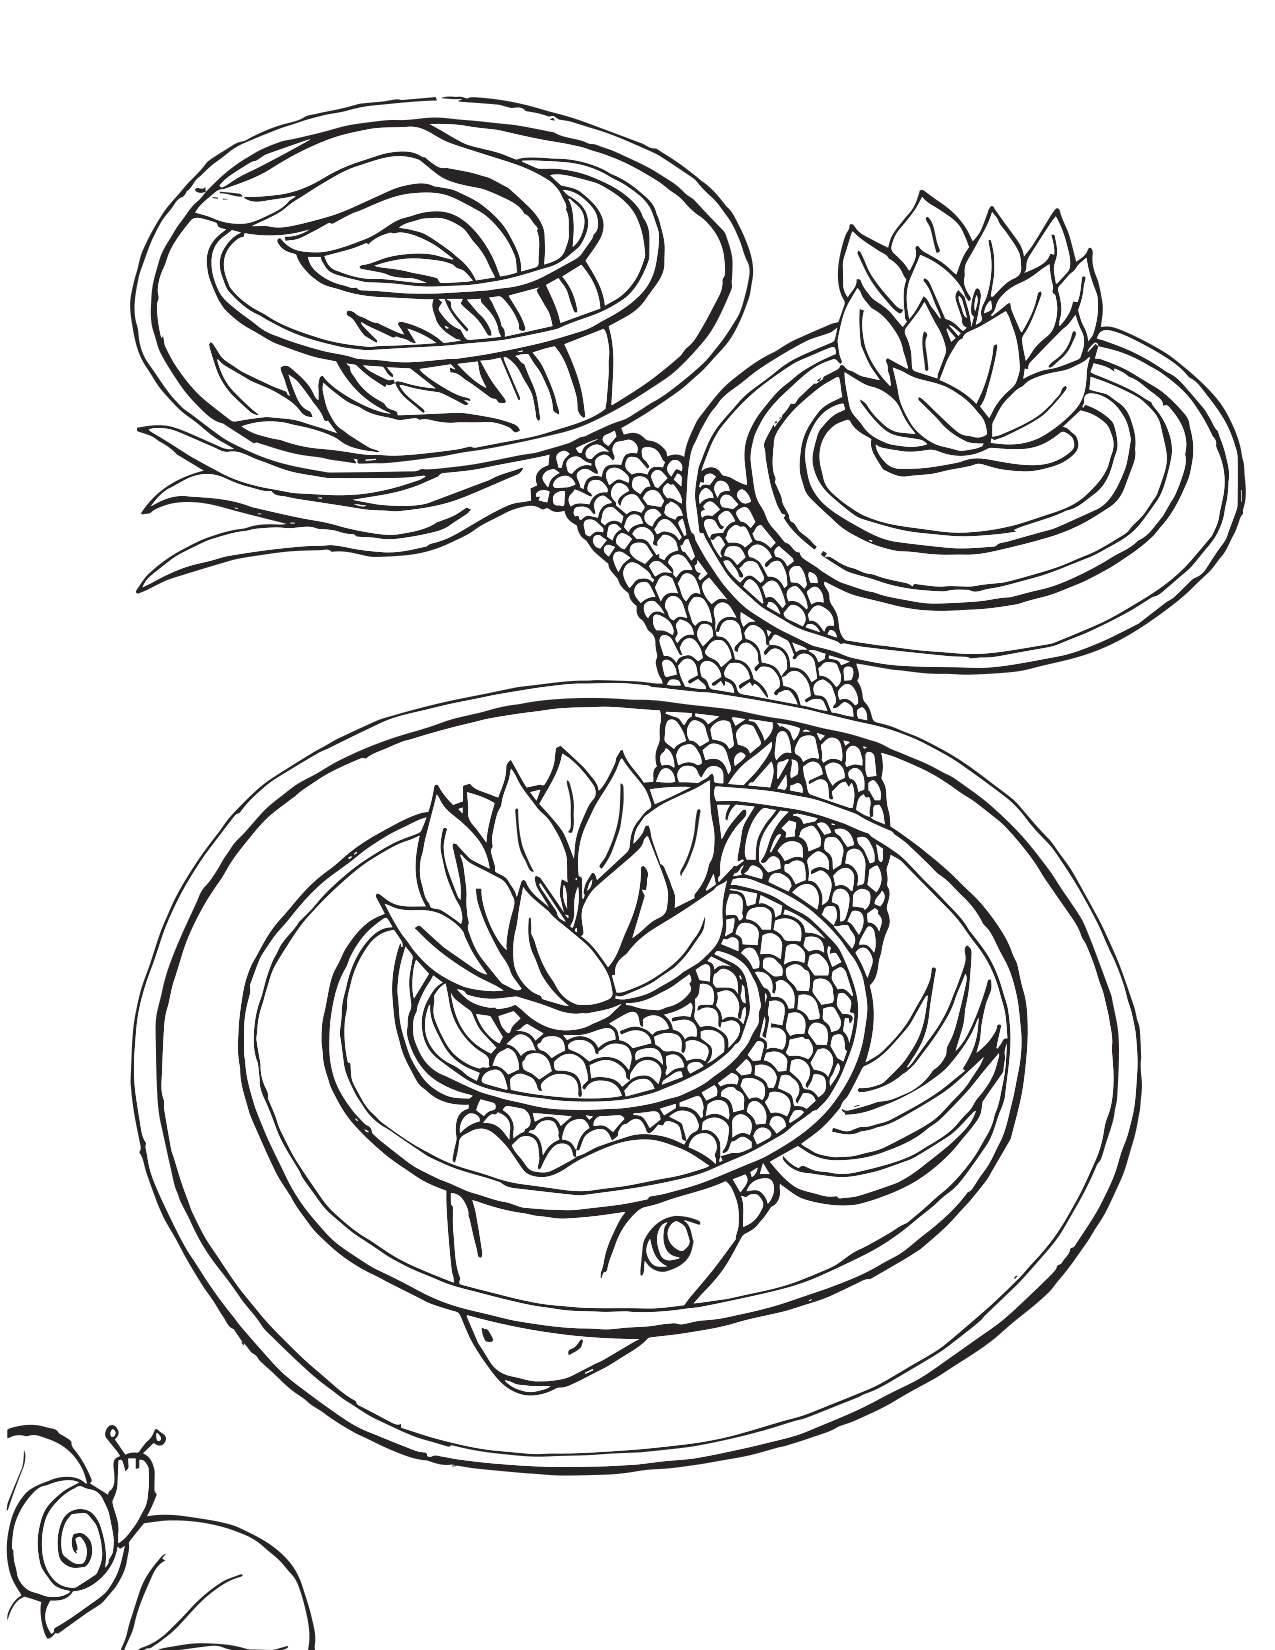 Koi Fish with Lily Pad Coloring Page – Mermaid Coloring Pages